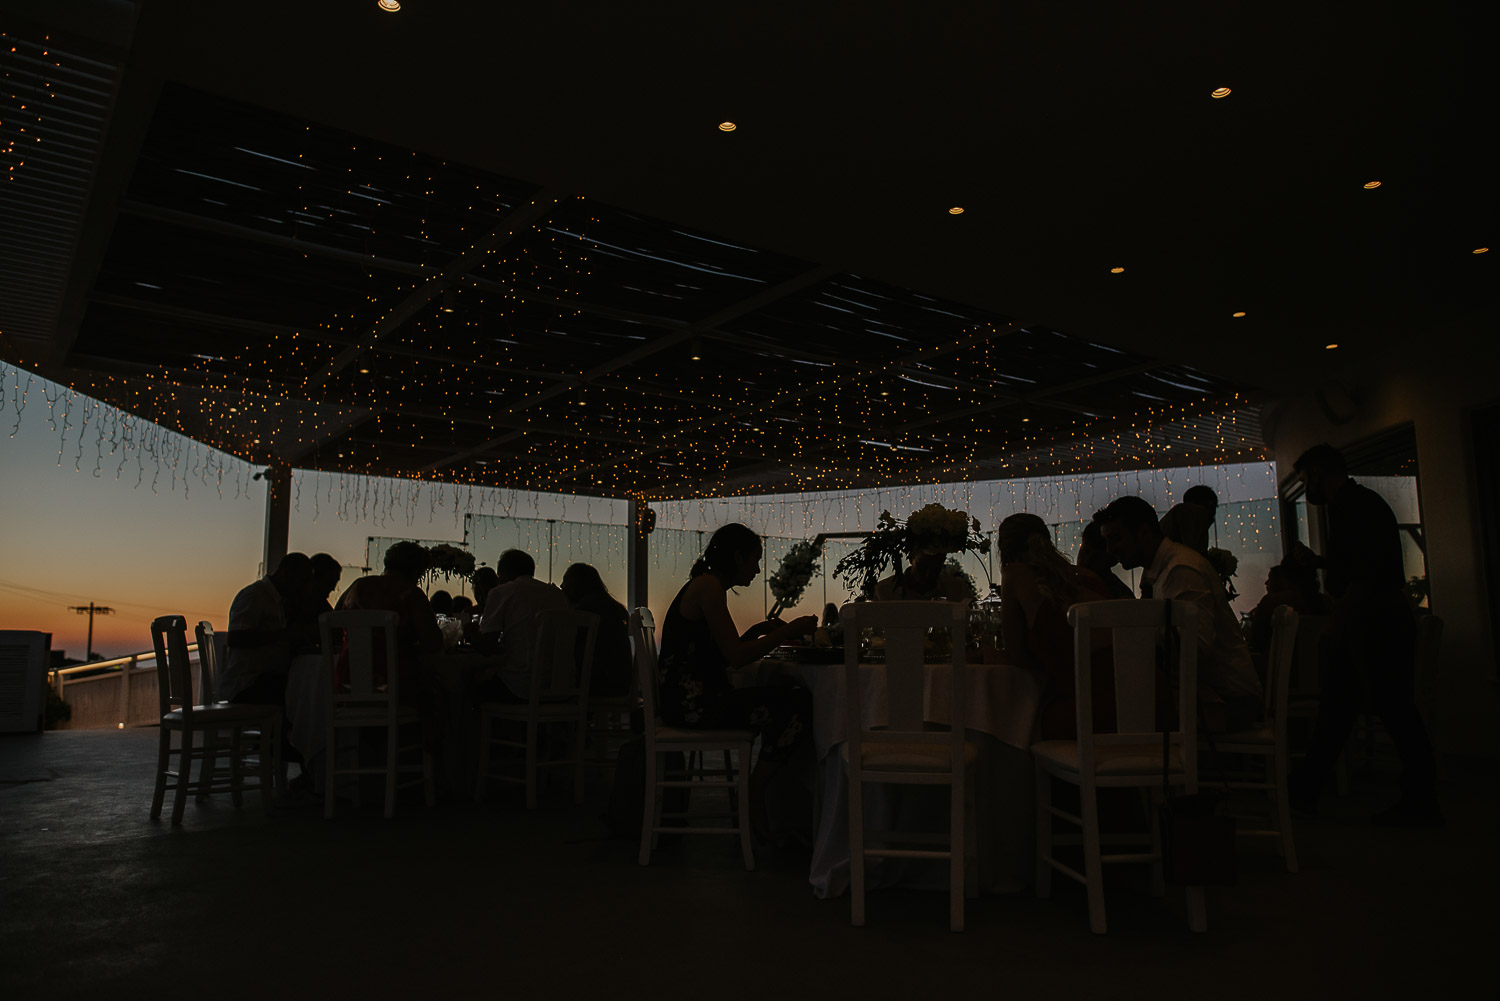 Wedding photographer Santorini: outlines of the guests sat on the reception terrace in the dusk light with fairy lights above them  by Ben and Vesna.